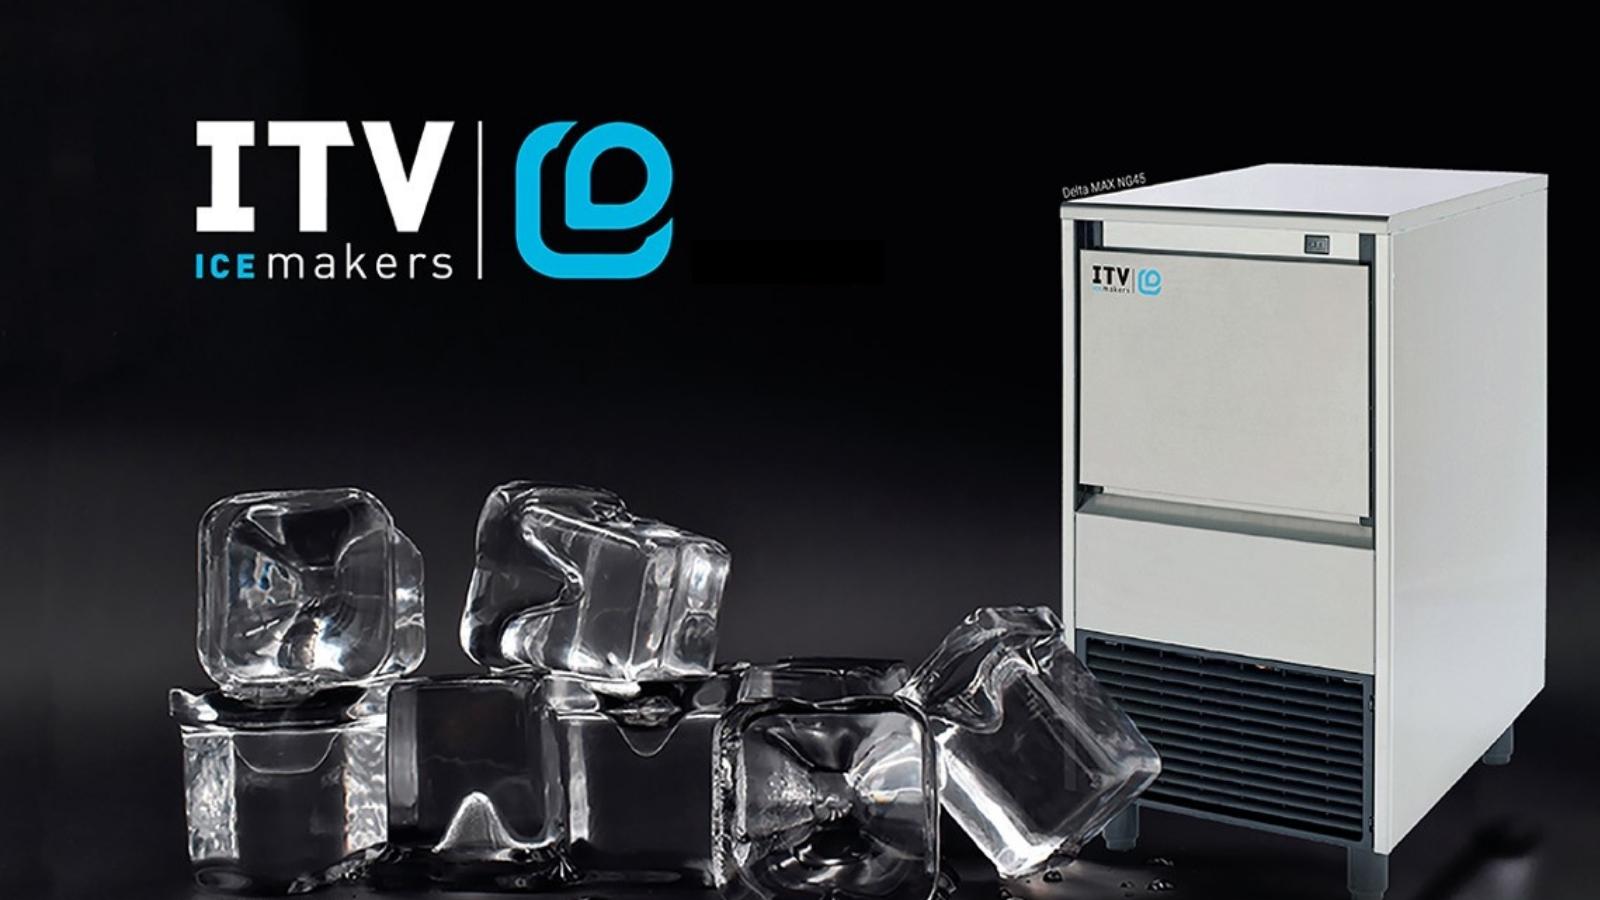 Now Introducing ITV Ice Makers